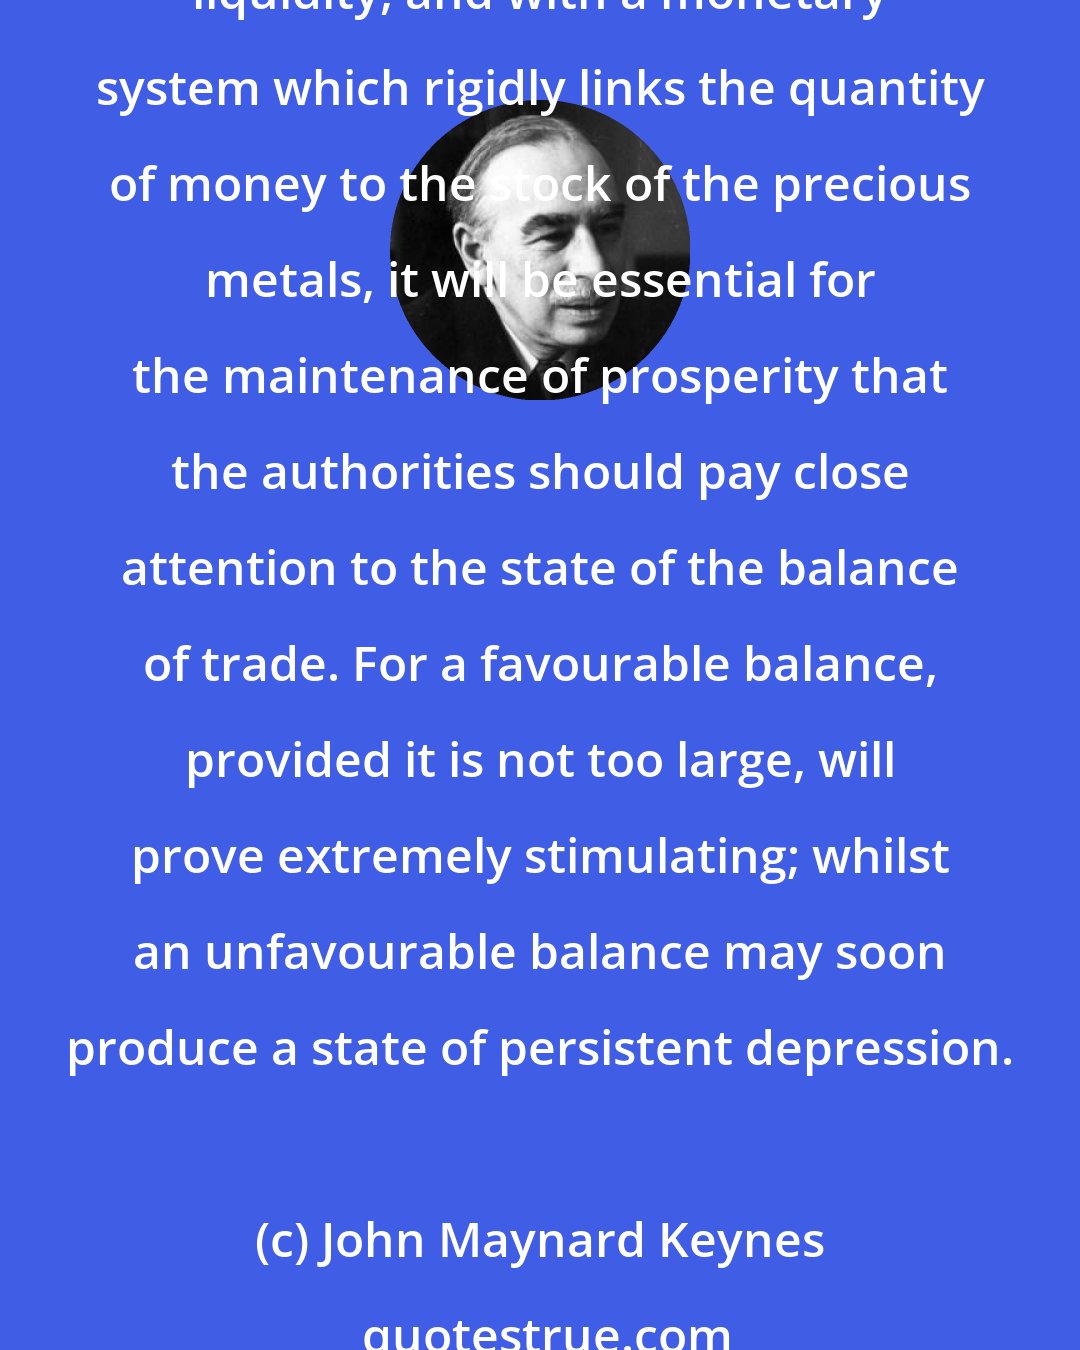 John Maynard Keynes: Nevertheless, if we contemplate a society with a somewhat stable wage-unit, with national characteristics which determine the propensity to consume and the preference for liquidity, and with a monetary system which rigidly links the quantity of money to the stock of the precious metals, it will be essential for the maintenance of prosperity that the authorities should pay close attention to the state of the balance of trade. For a favourable balance, provided it is not too large, will prove extremely stimulating; whilst an unfavourable balance may soon produce a state of persistent depression.